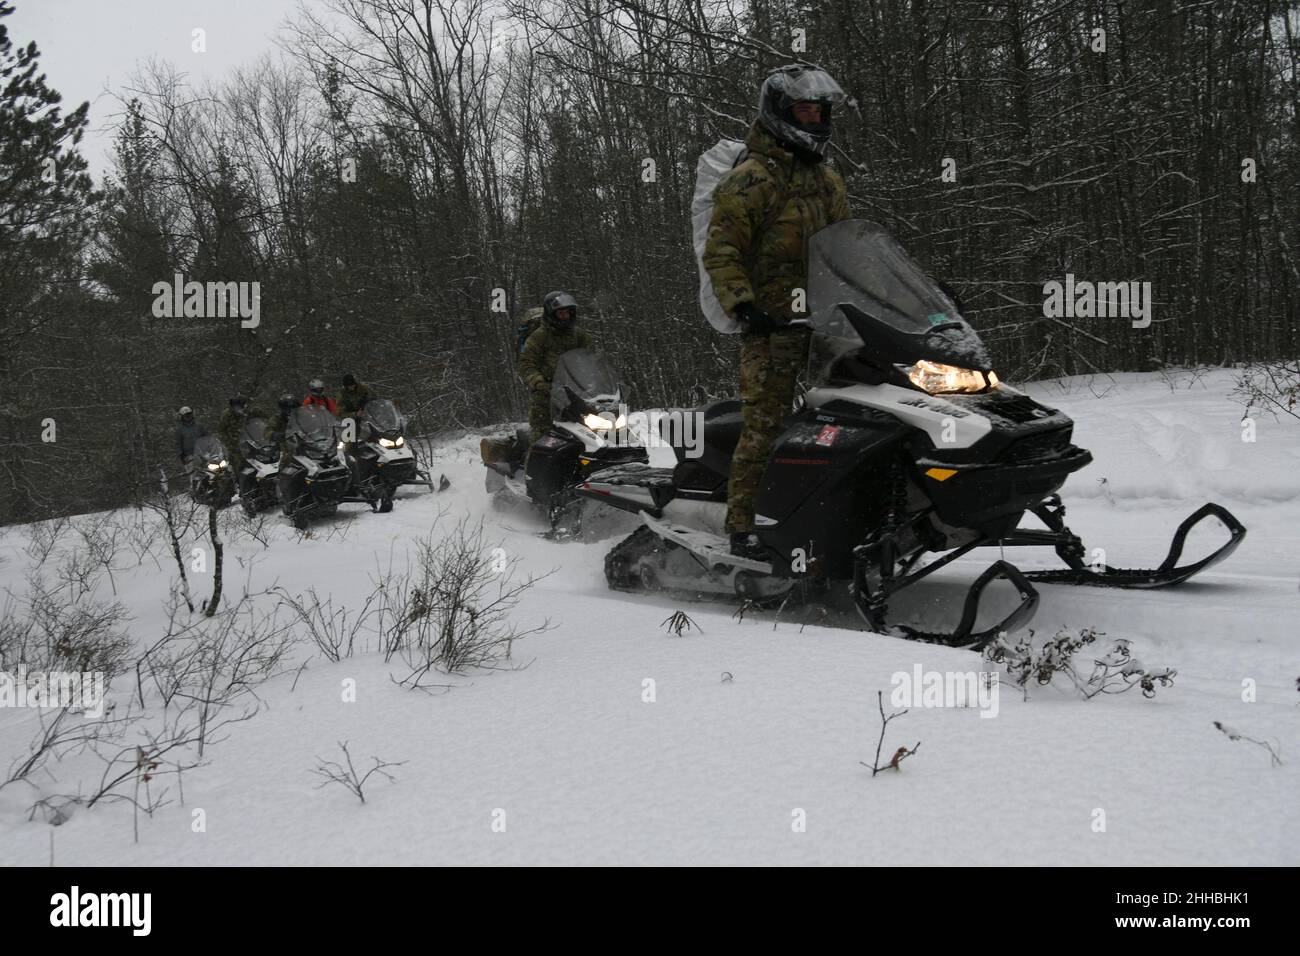 U.S. Army Soldiers from the 20th Special Forces Group, Massachusetts Army National Guard, conduct snowmobile training during Northern Strike 22-1, at Camp Grayling, Mich., Jan. 22, 2022. The winter iteration of the Northern Strike exercise series, known as “Winter Strike,” is held annually in northern Michigan during the coldest part of the year, so visiting units can train in subarctic conditions. (U.S. Air National Guard photo by Staff Sgt. Tristan D. Viglianco) Stock Photo